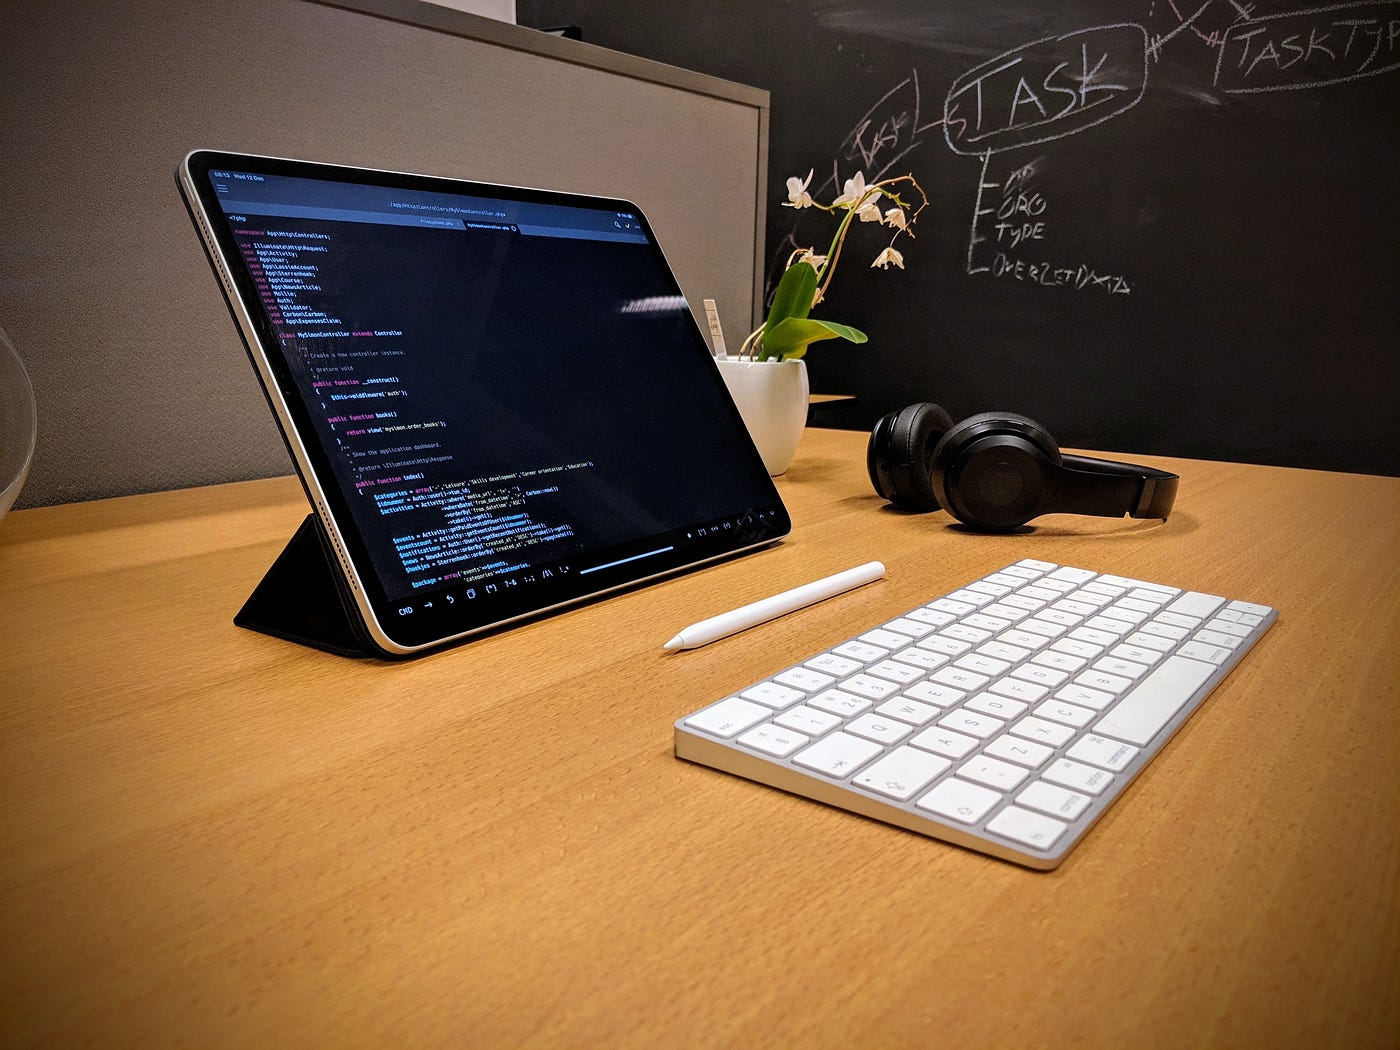 The giant leap: switching to iPad Pro as a web dev | by Bart Verhaegh |  Medium